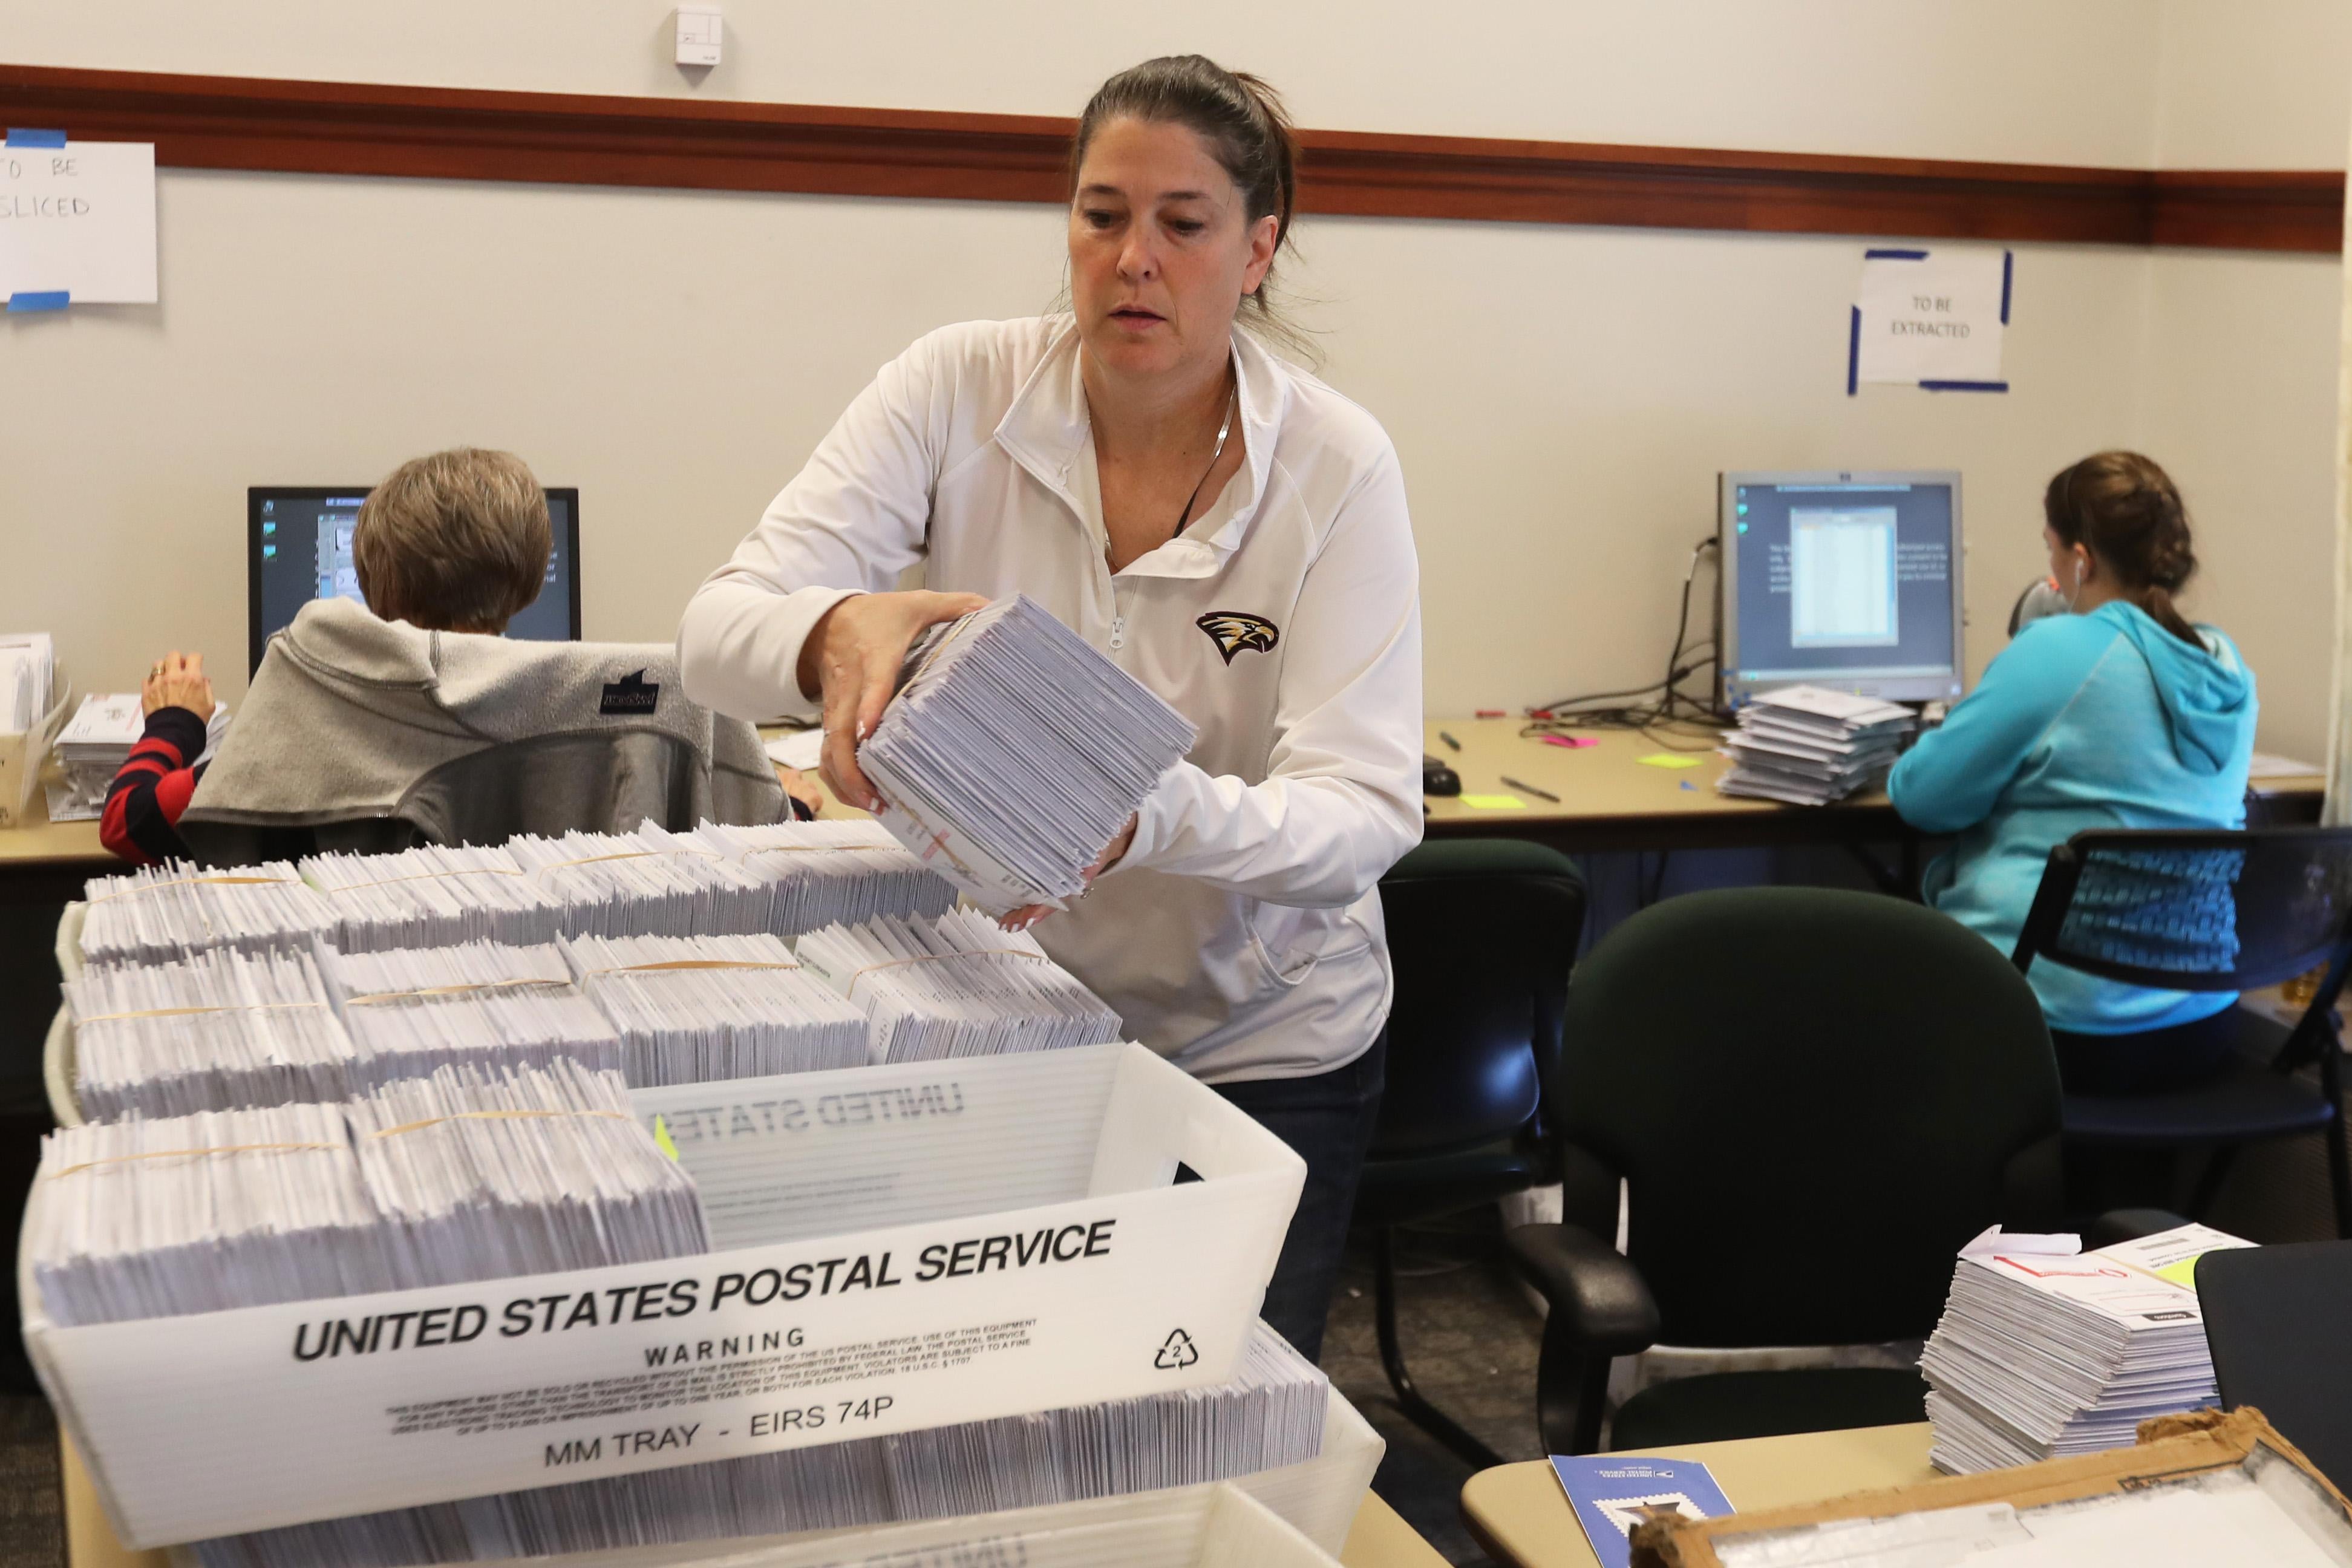 Thousands of ballots sit in boxes as Utah County election workers process the mail-in ballots. Utah conducts elections entirely by mail.